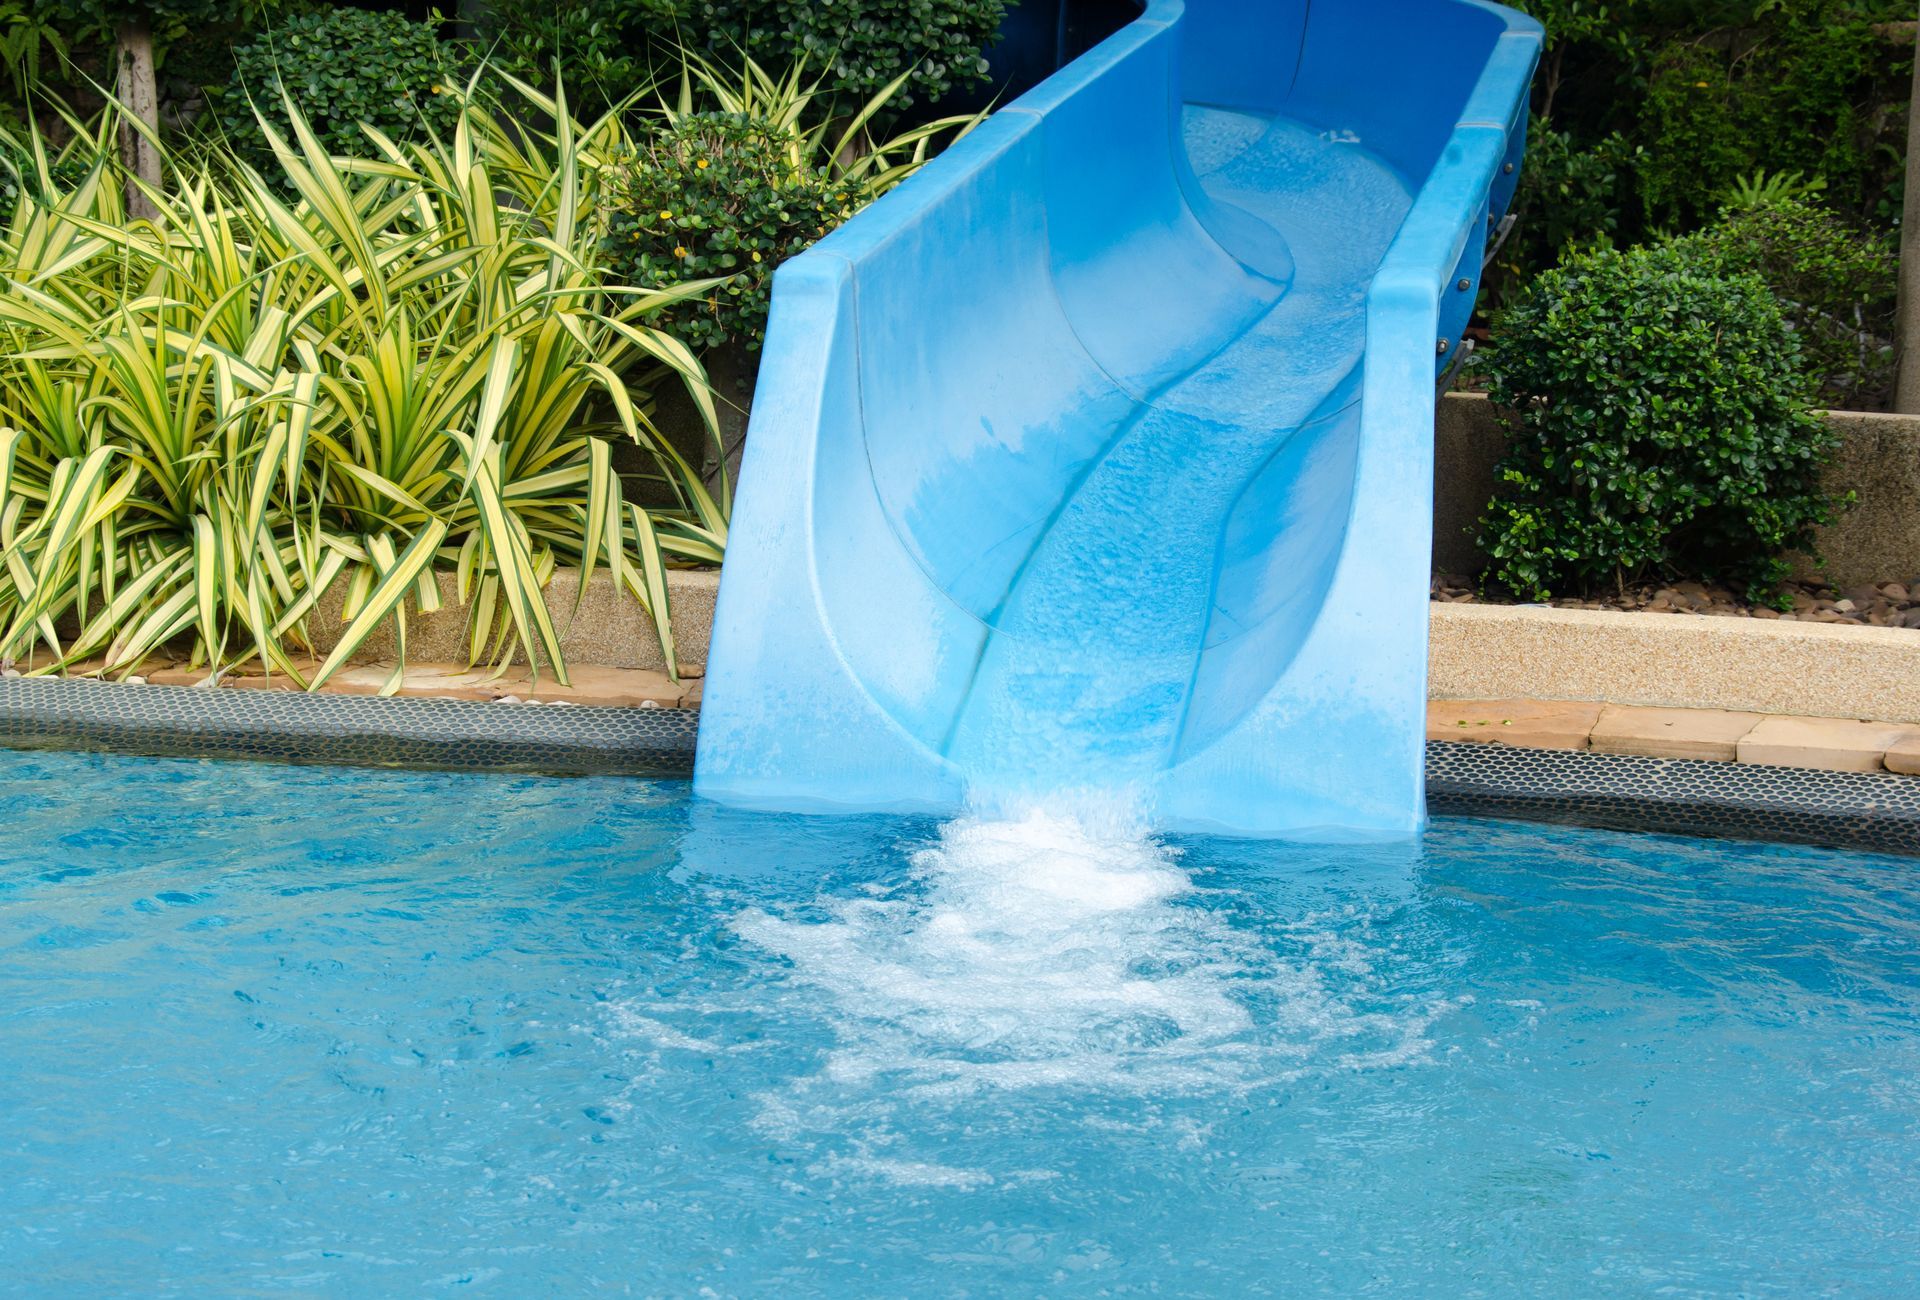 A blue water slide is going down a swimming pool.